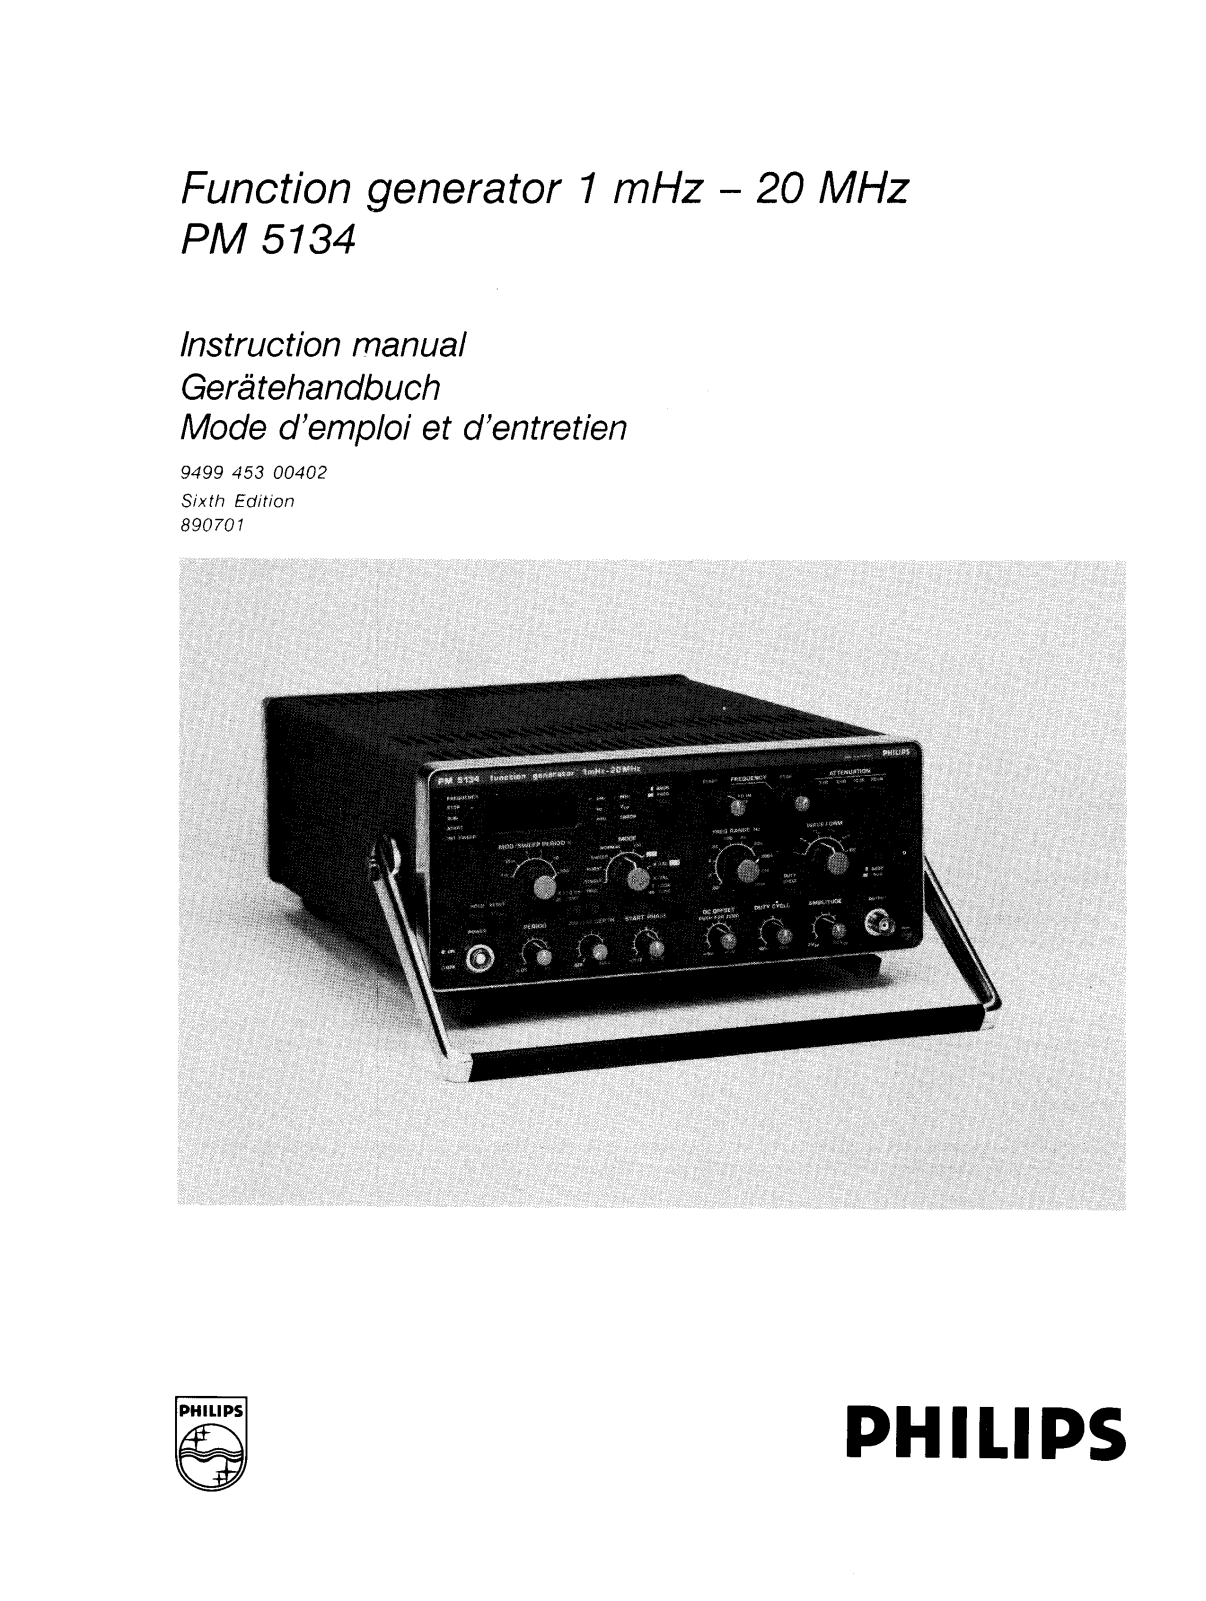 Philips PM 5134 Service Manual